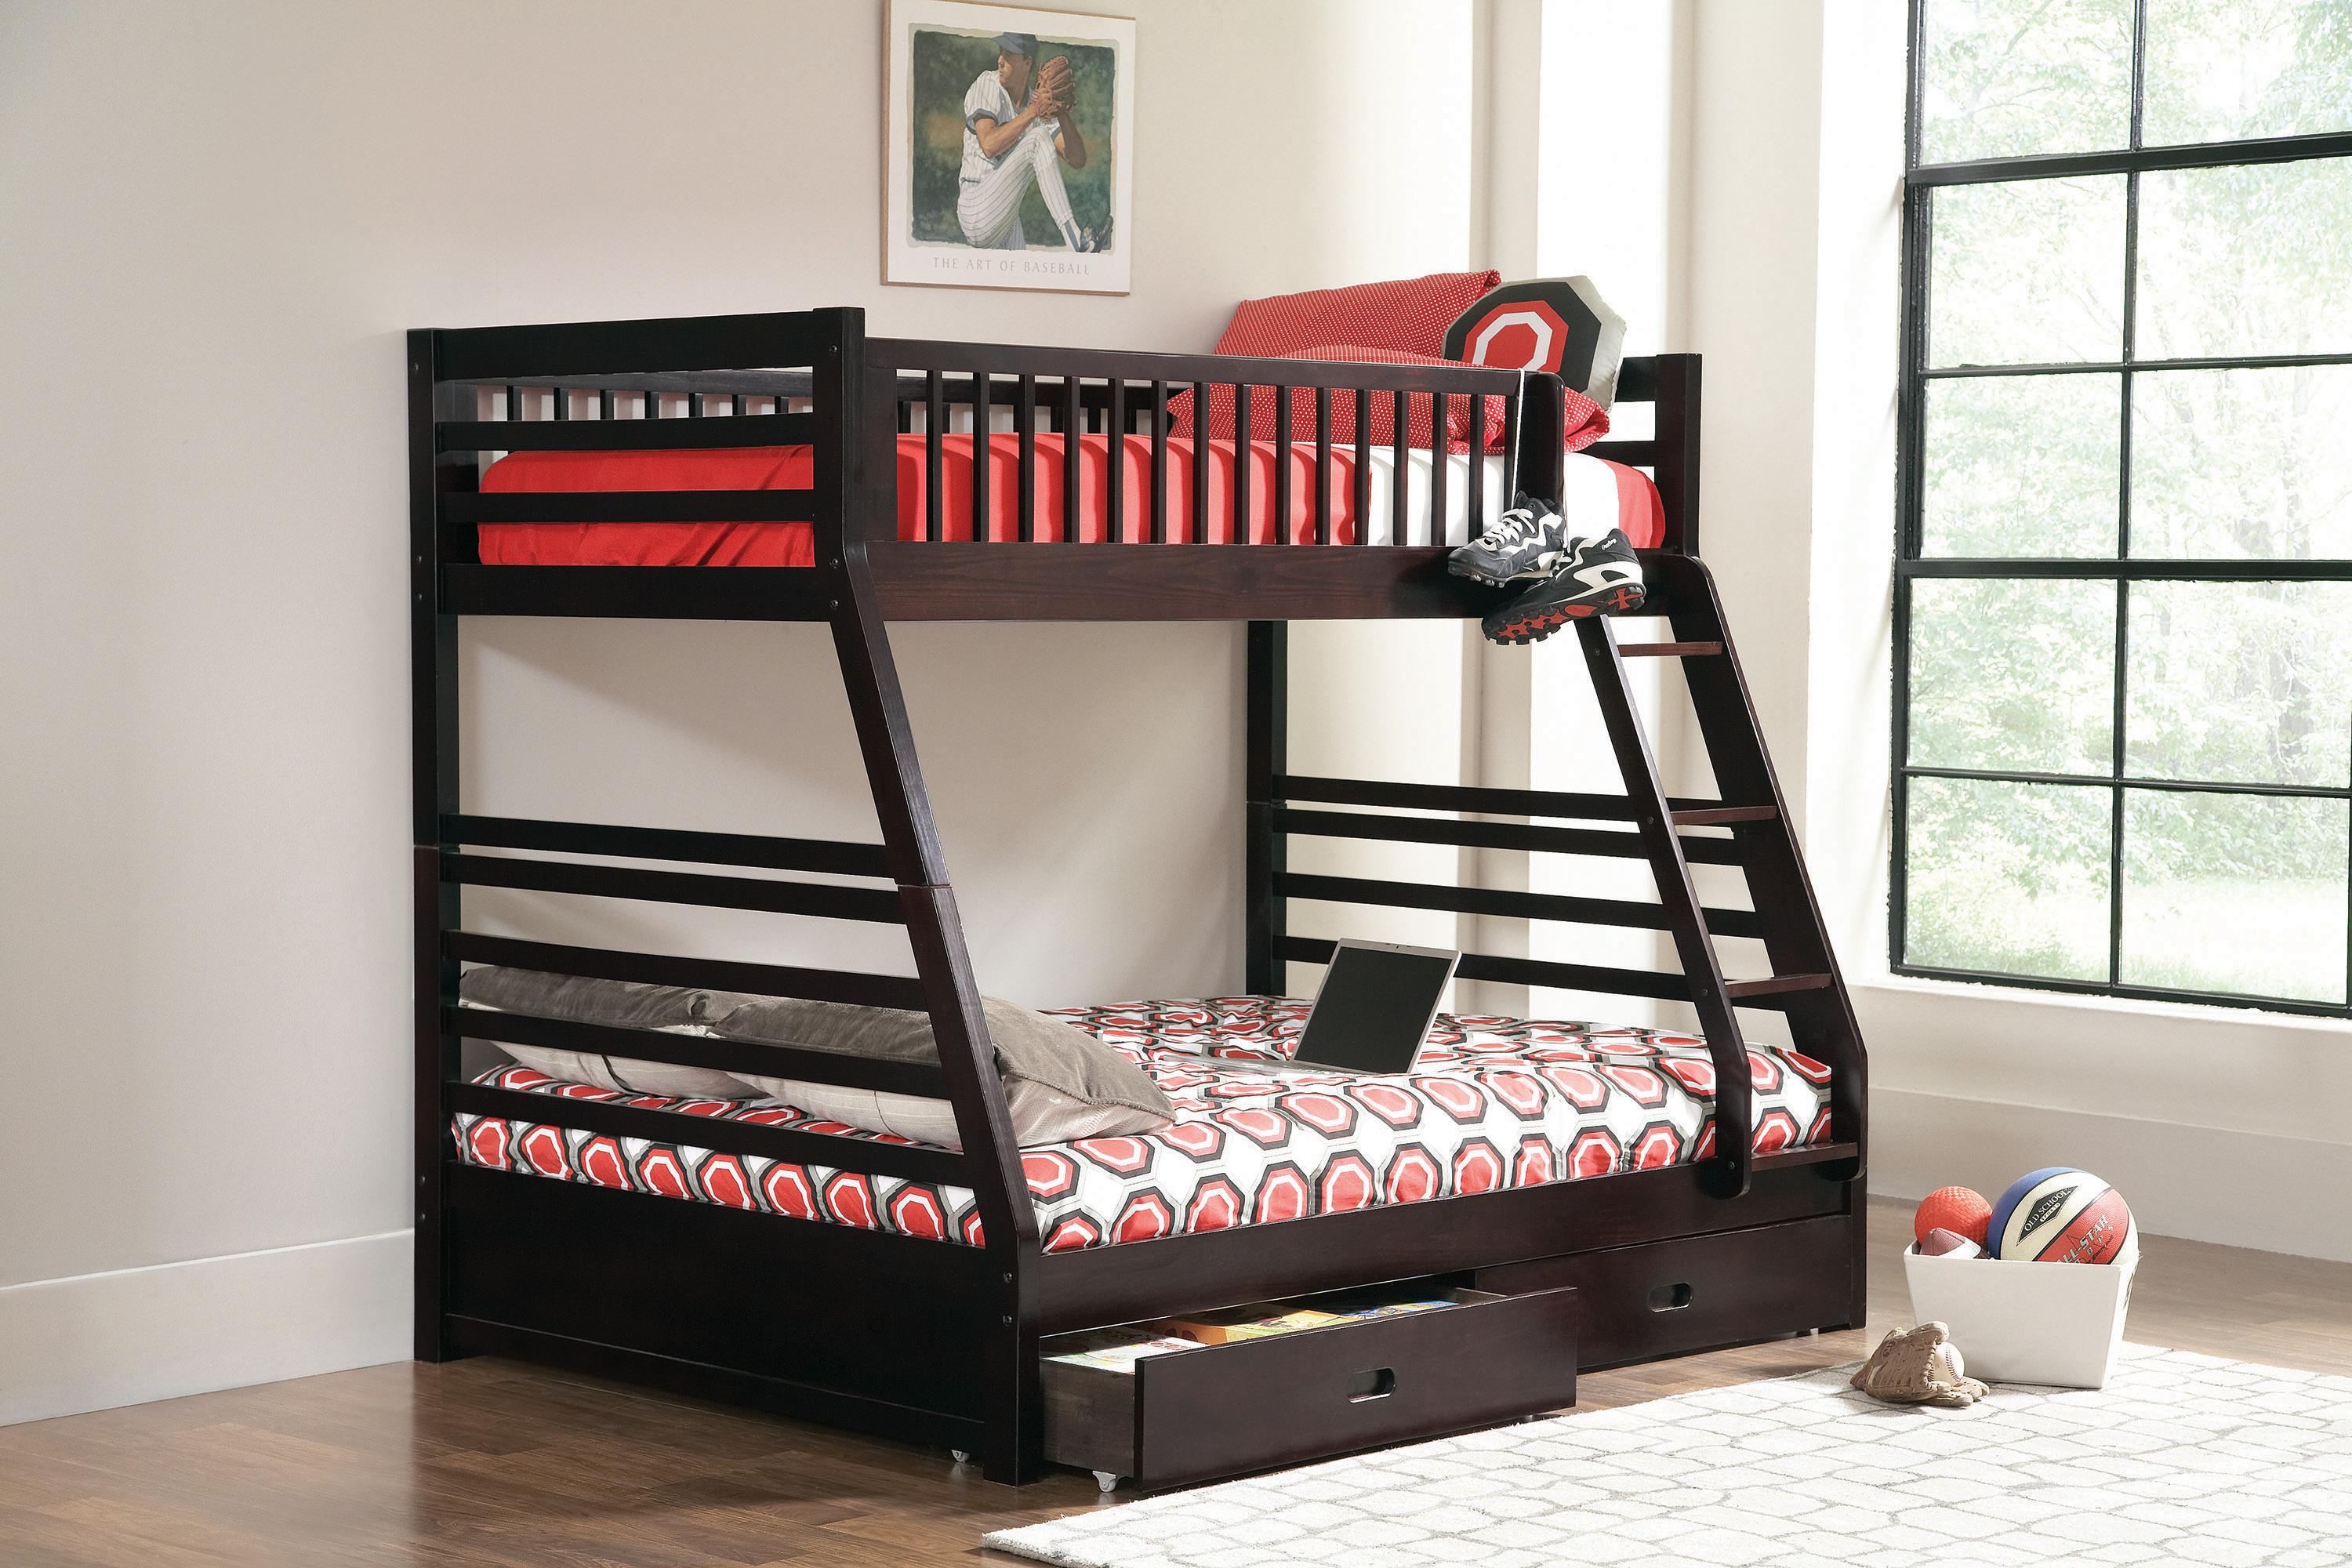 Transitional Bunk Bed 460184 Ashton 460184 in Cappuccino 